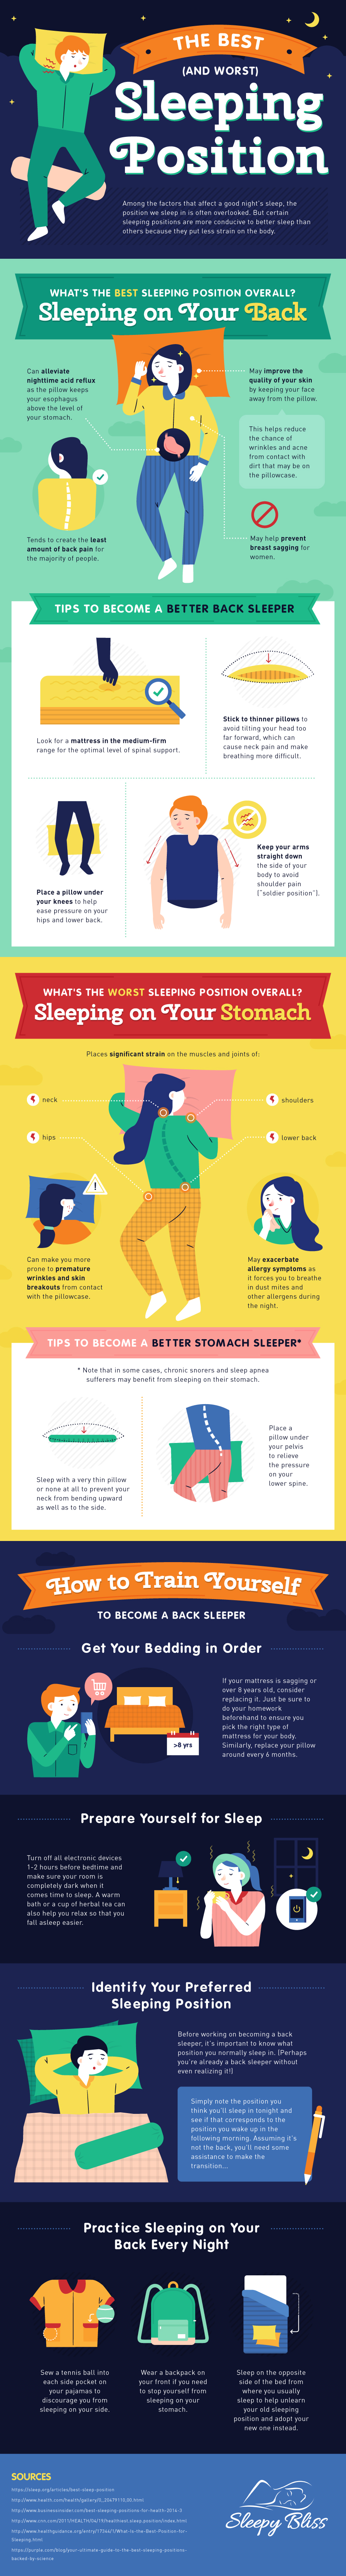 Infographic for The Best and Worst Sleeping Position